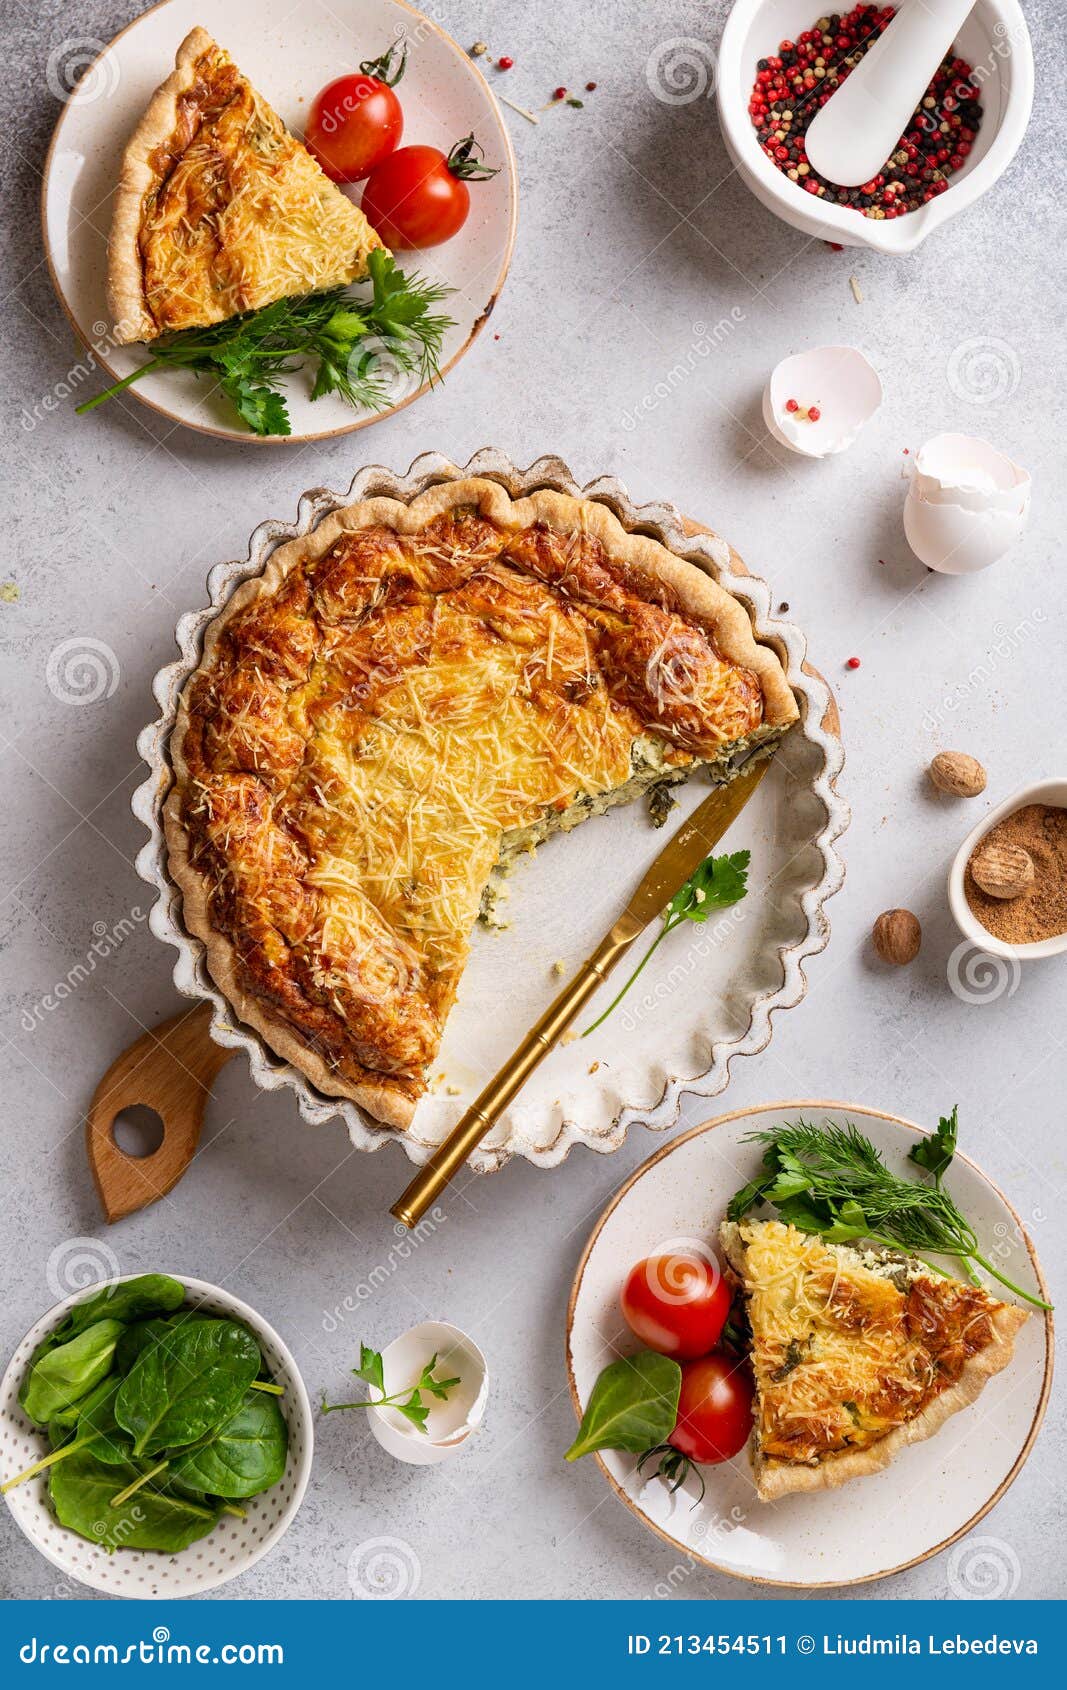 French Quiche Lorraine Cut into Slices and Served on Plates with ...